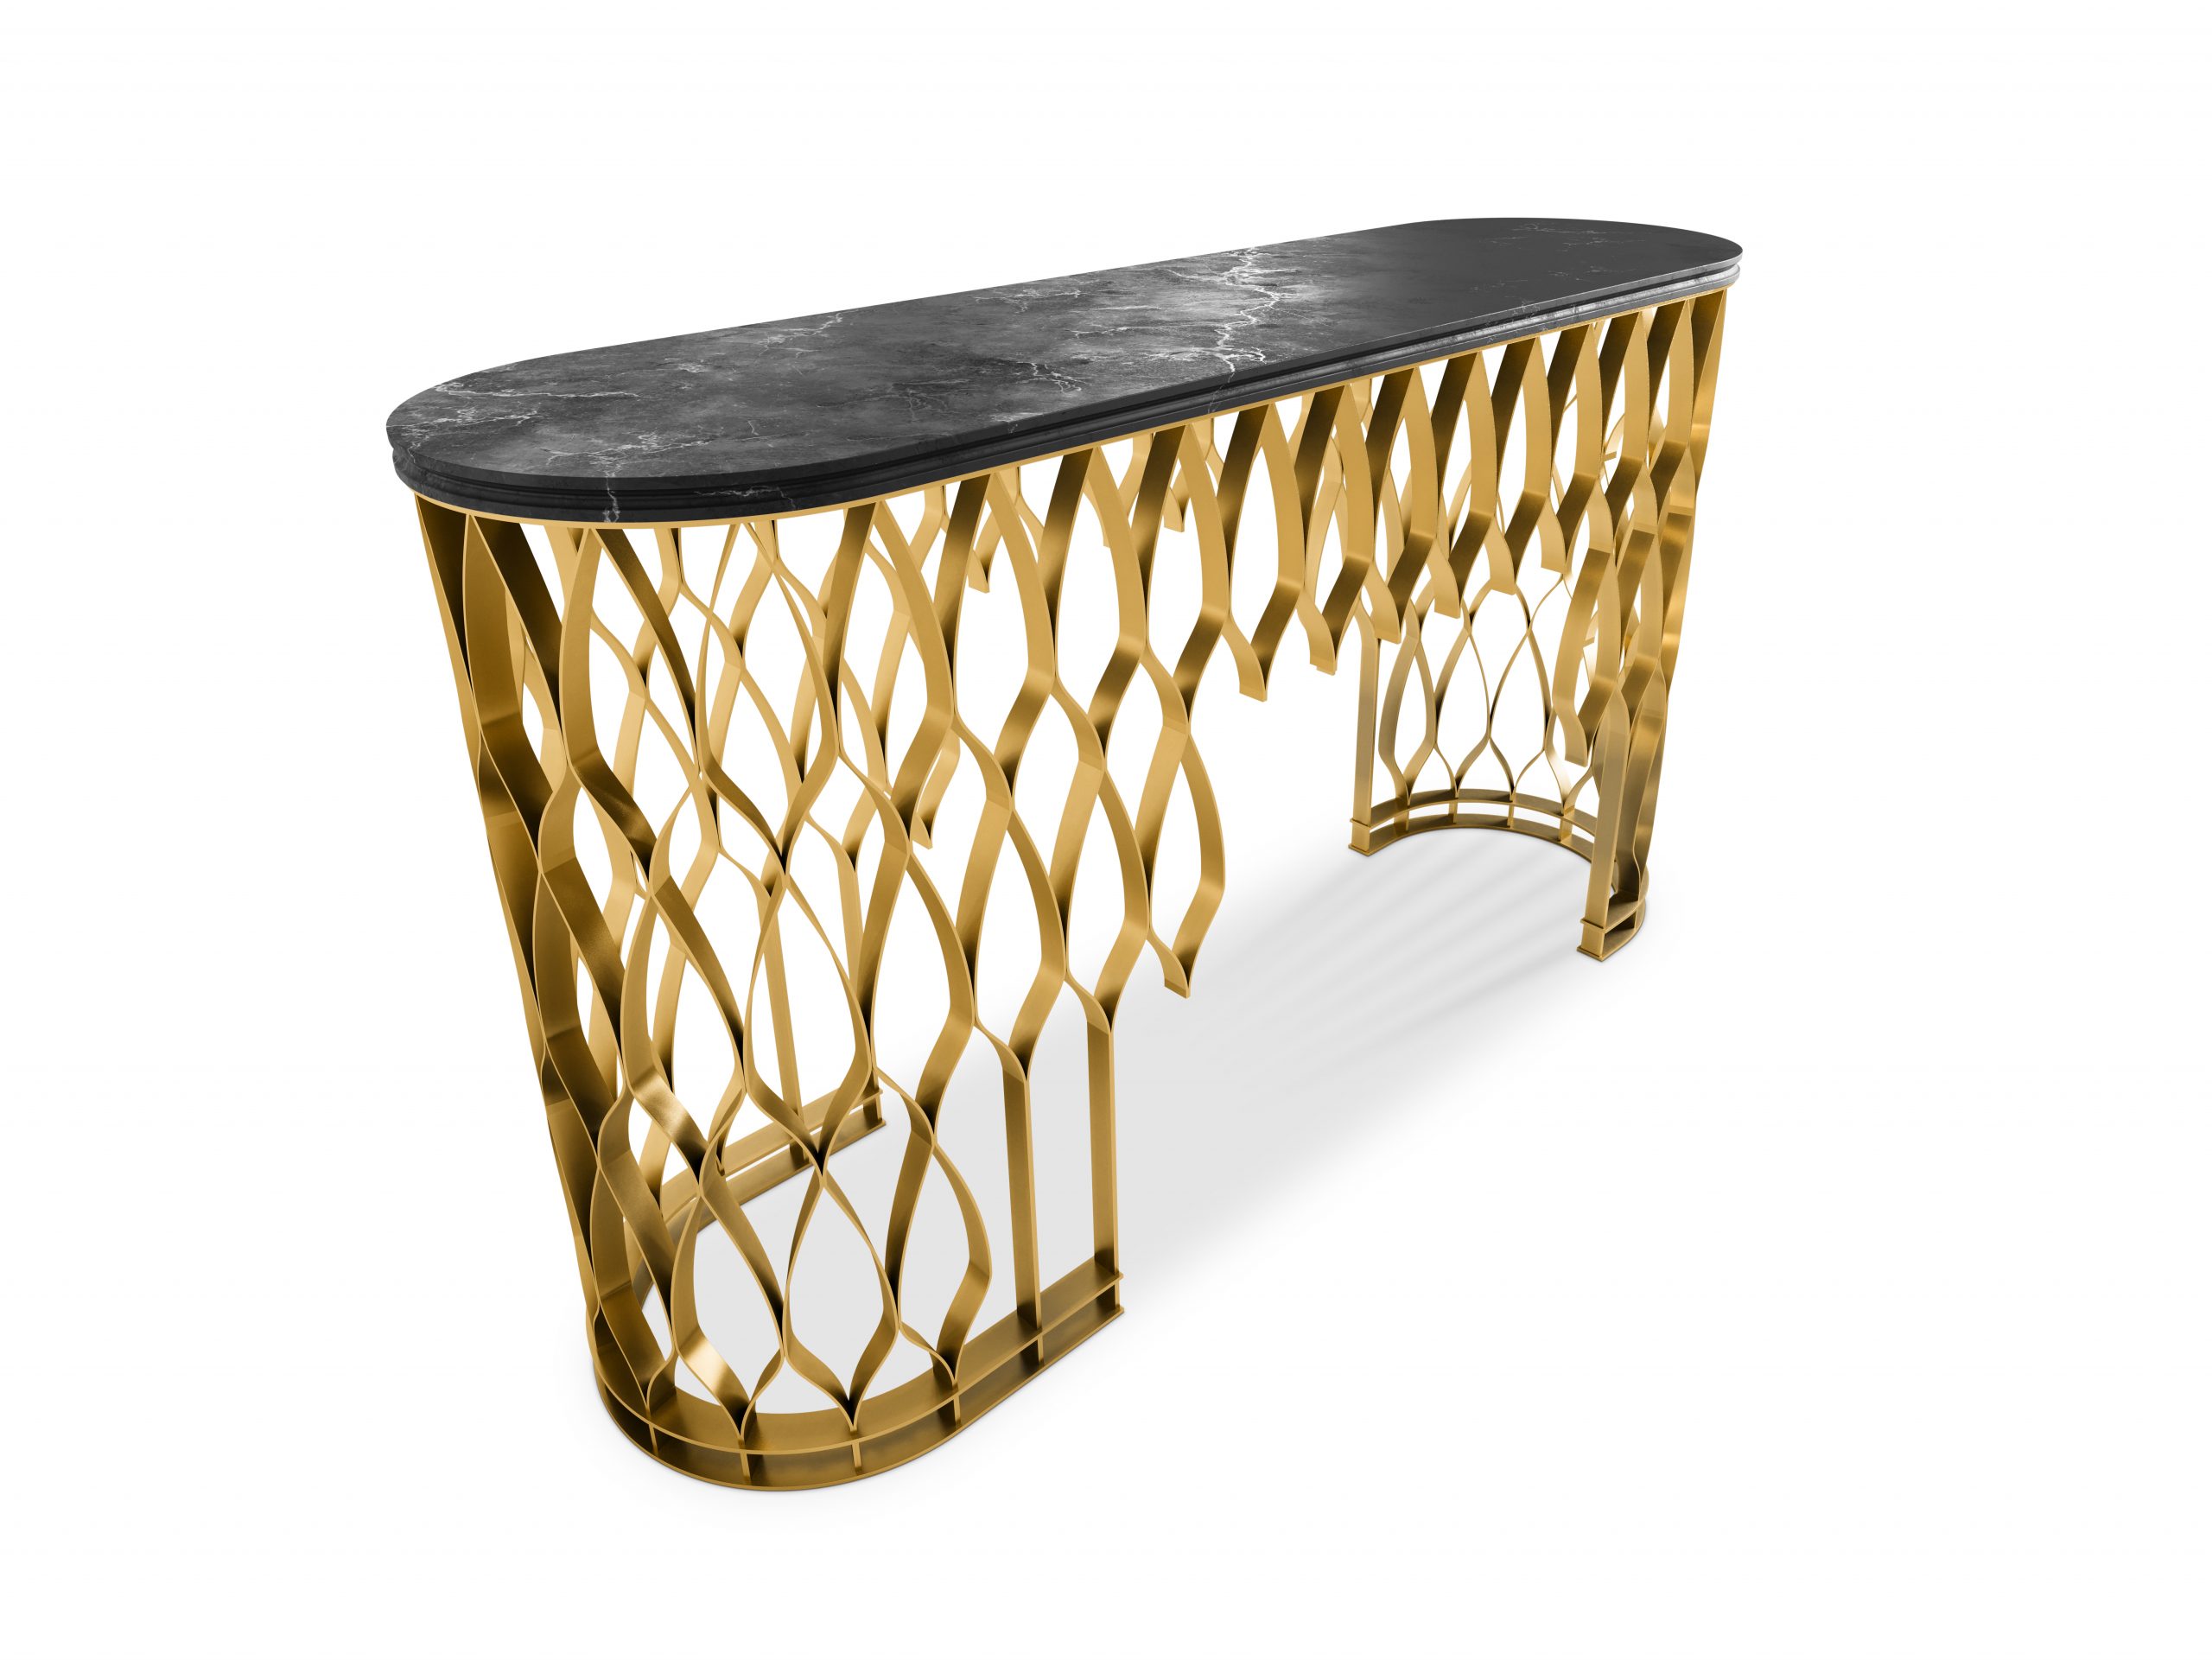 Salone del Mobile Spectacle: Mecca Console Steals the Show